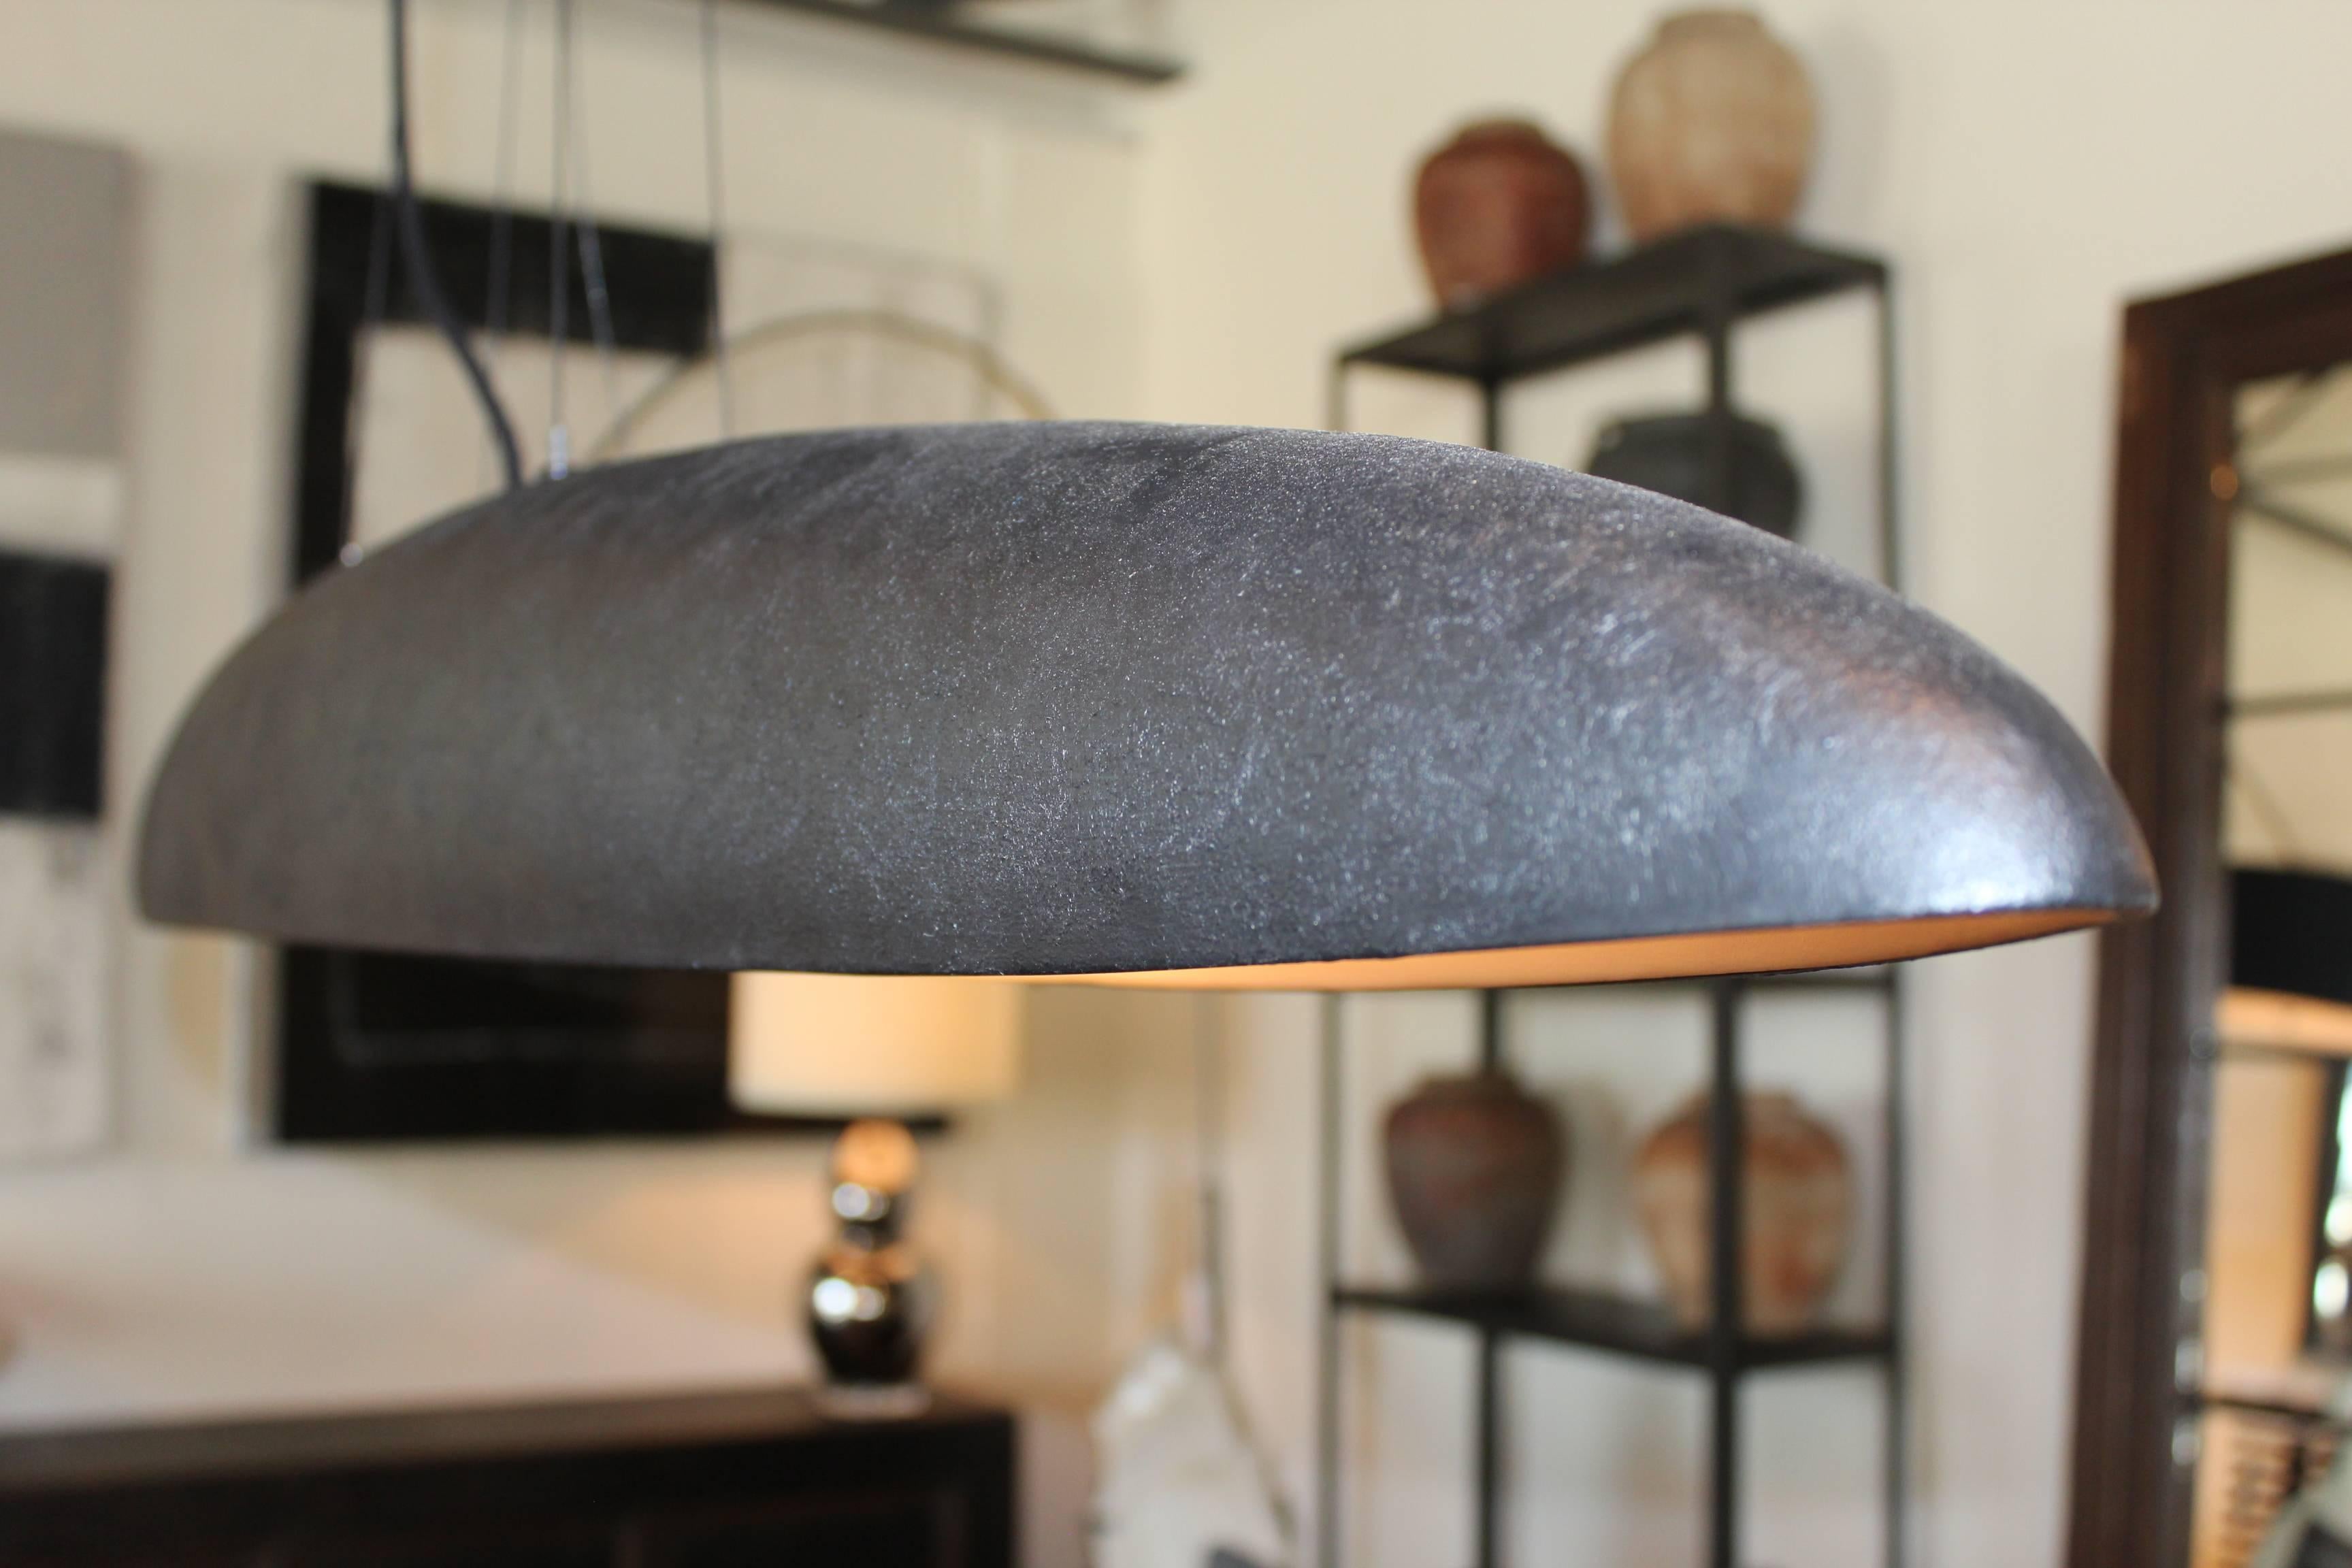 Elongated oval chandelier designed by Brendan Bass. Made in Italy
Glazed ceramic with a matte charcoal textured finish. 60 watt max. Each socket (two).


Brendan Bass Custom -  Item can be reproduced